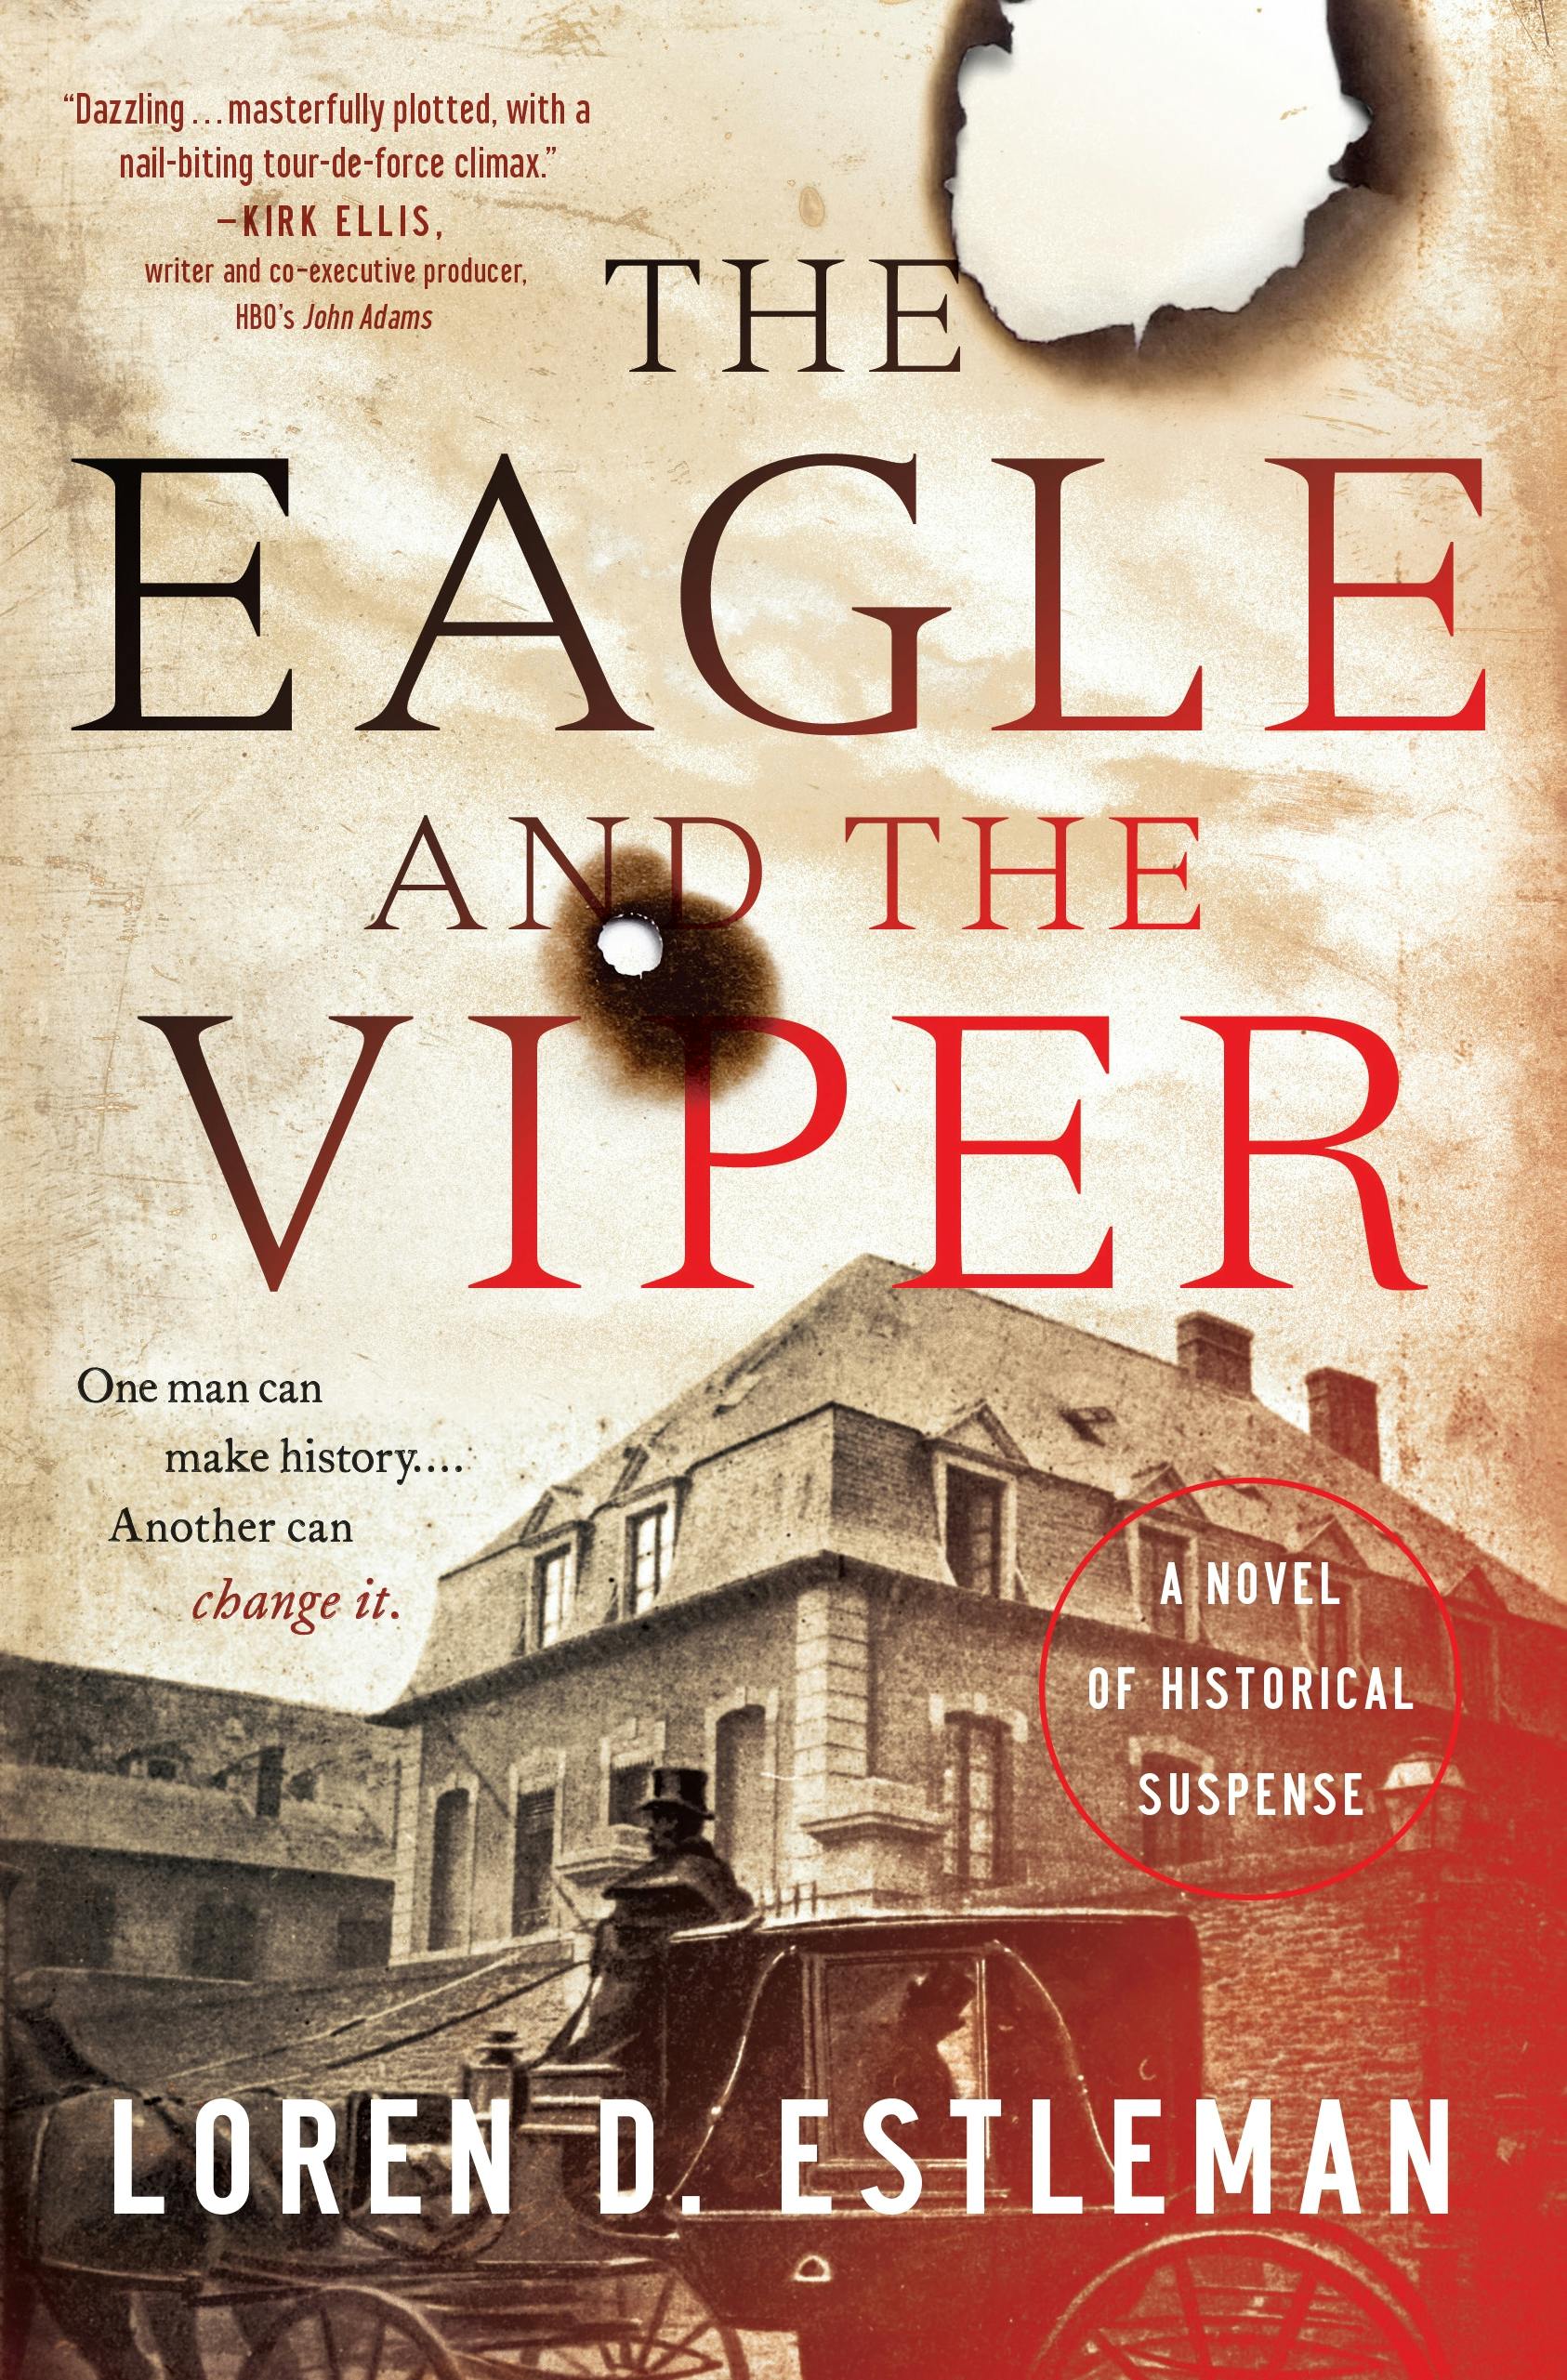 Cover for the book titled as: The Eagle and the Viper